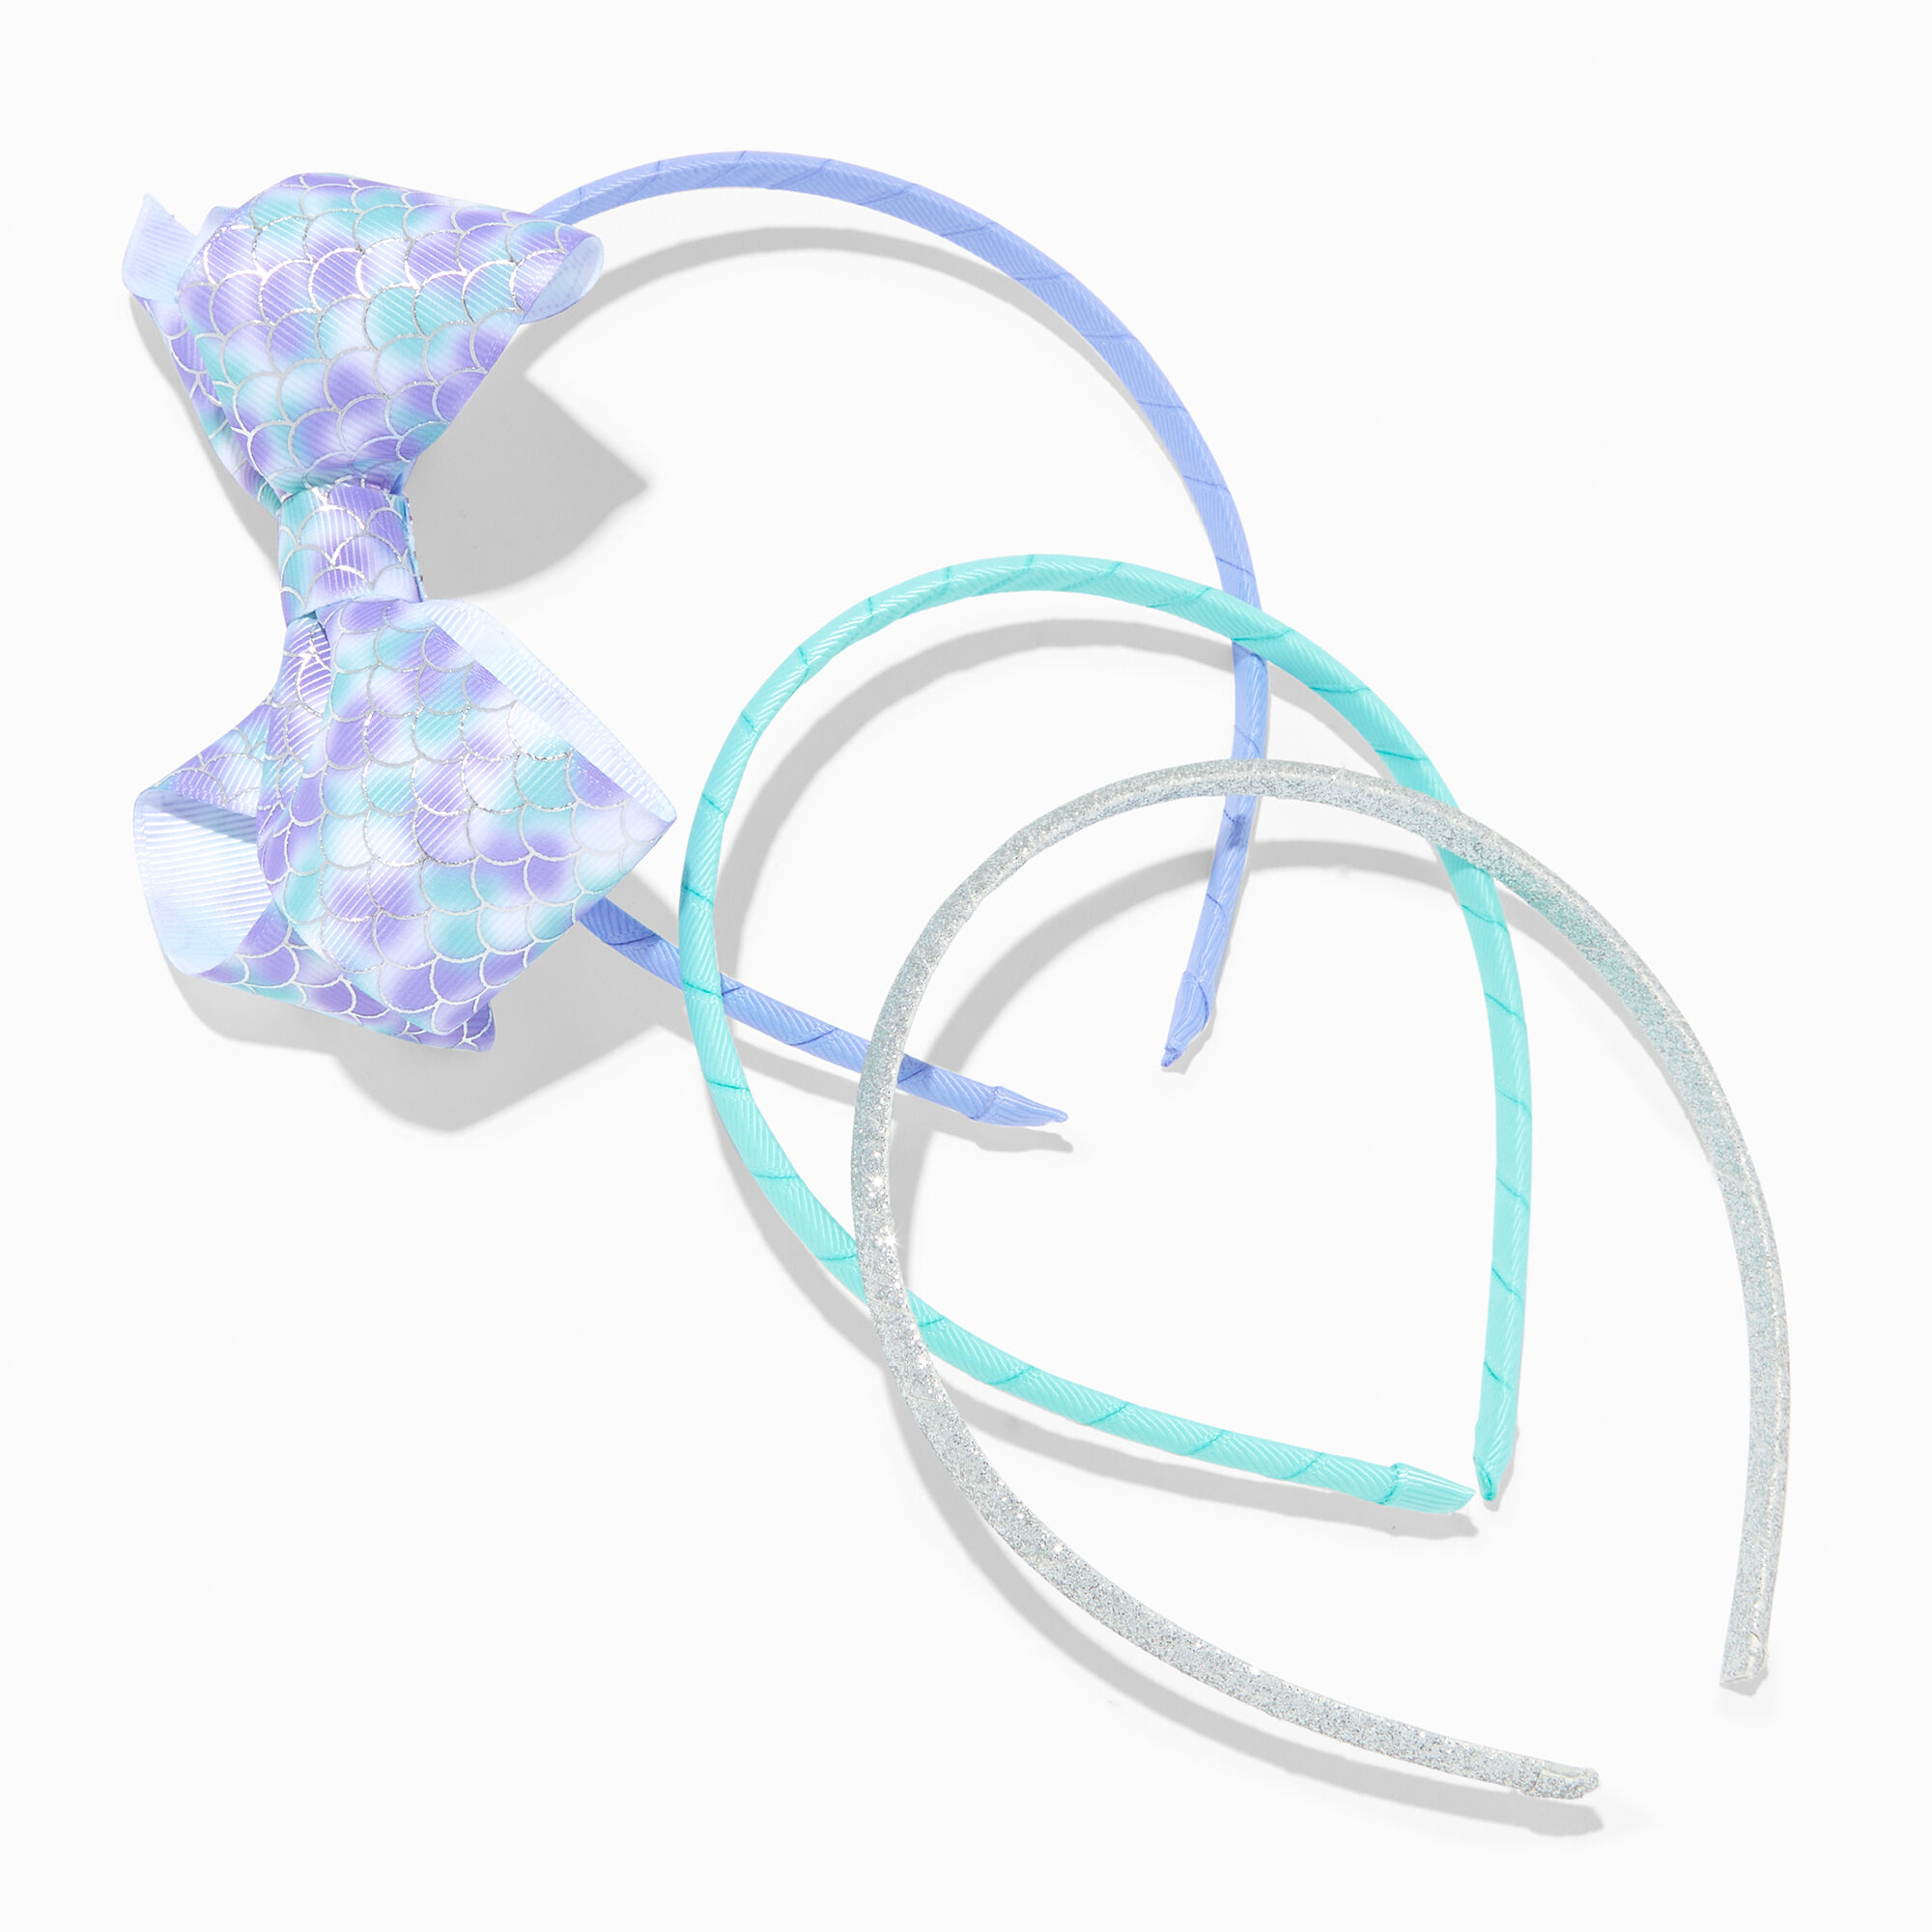 View Claires Club Mermaid Loopy Bow Headbands 3 Pack information